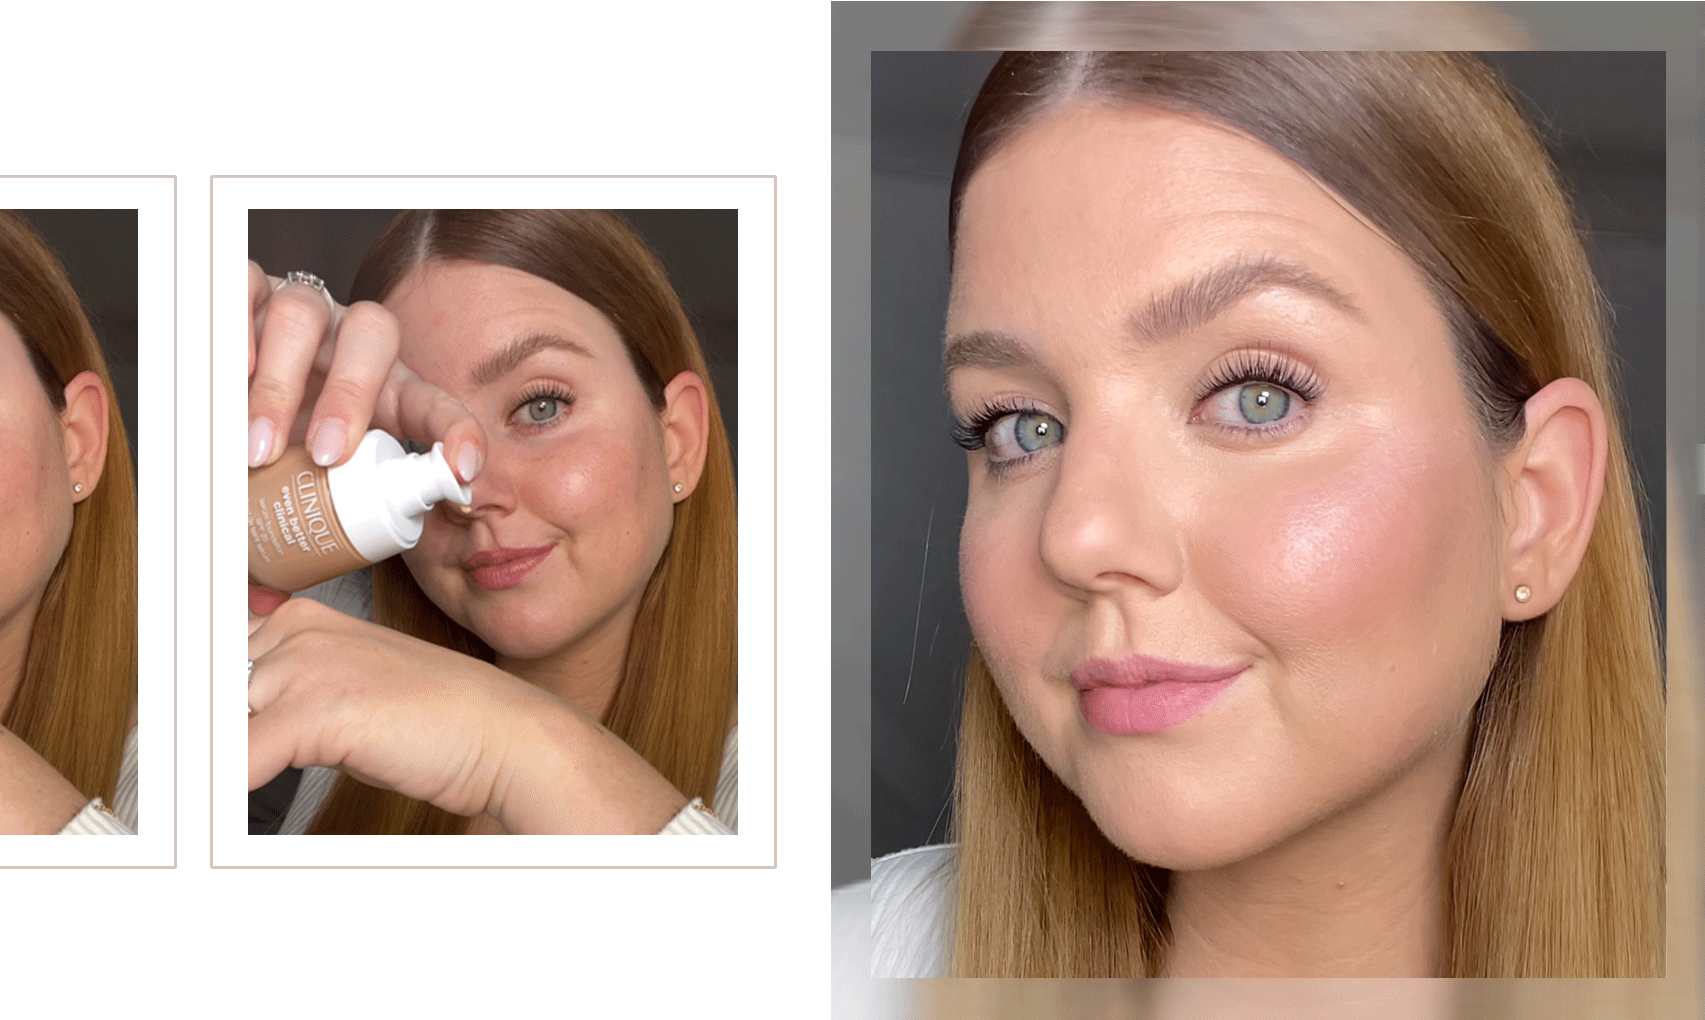 clinique even better foundation before and after